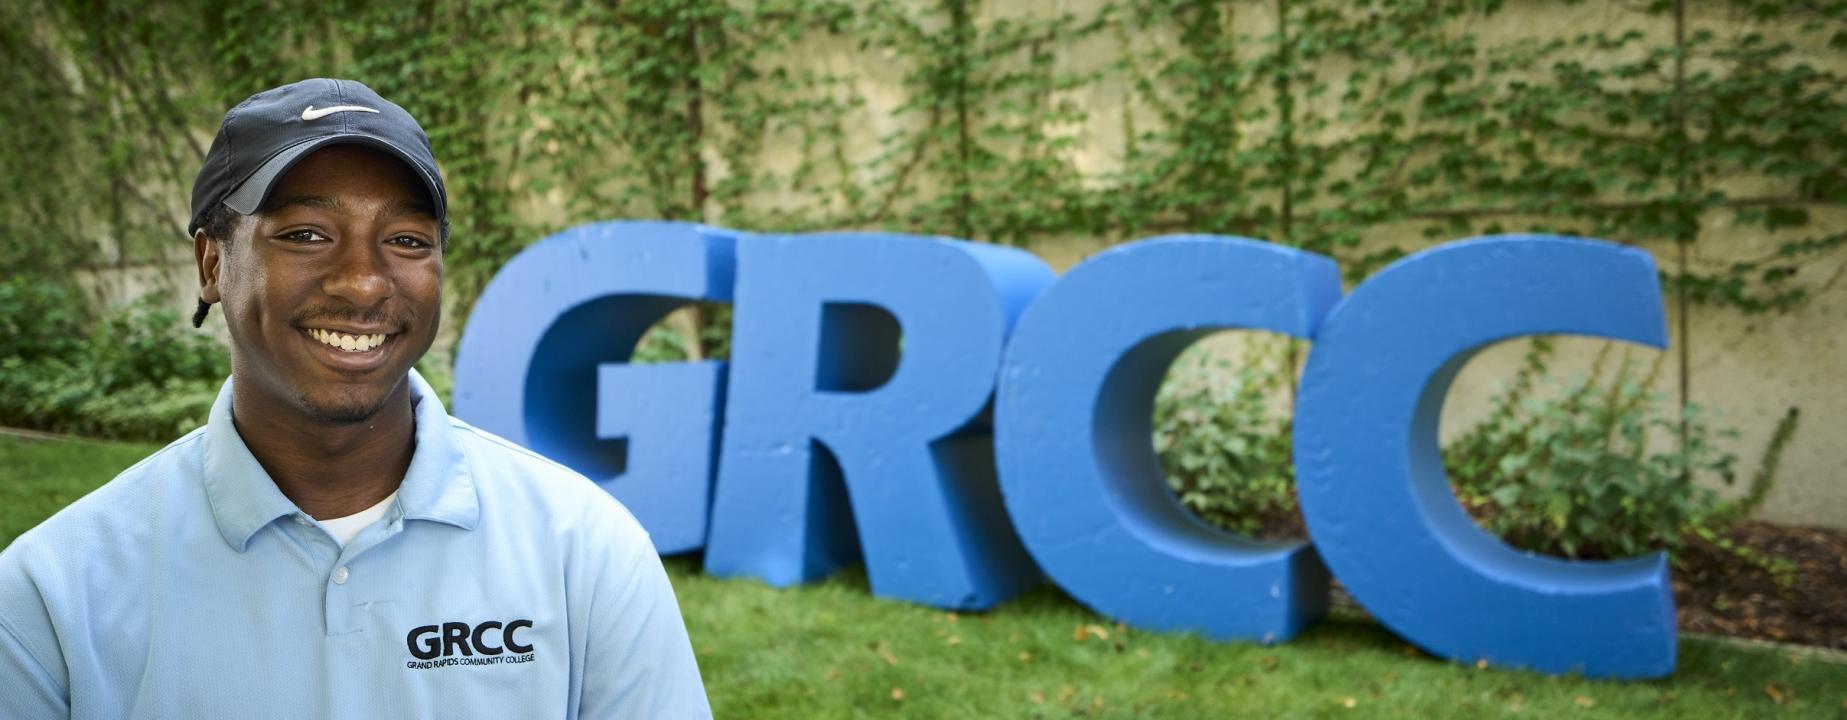 Student standing next to the GRCC letters